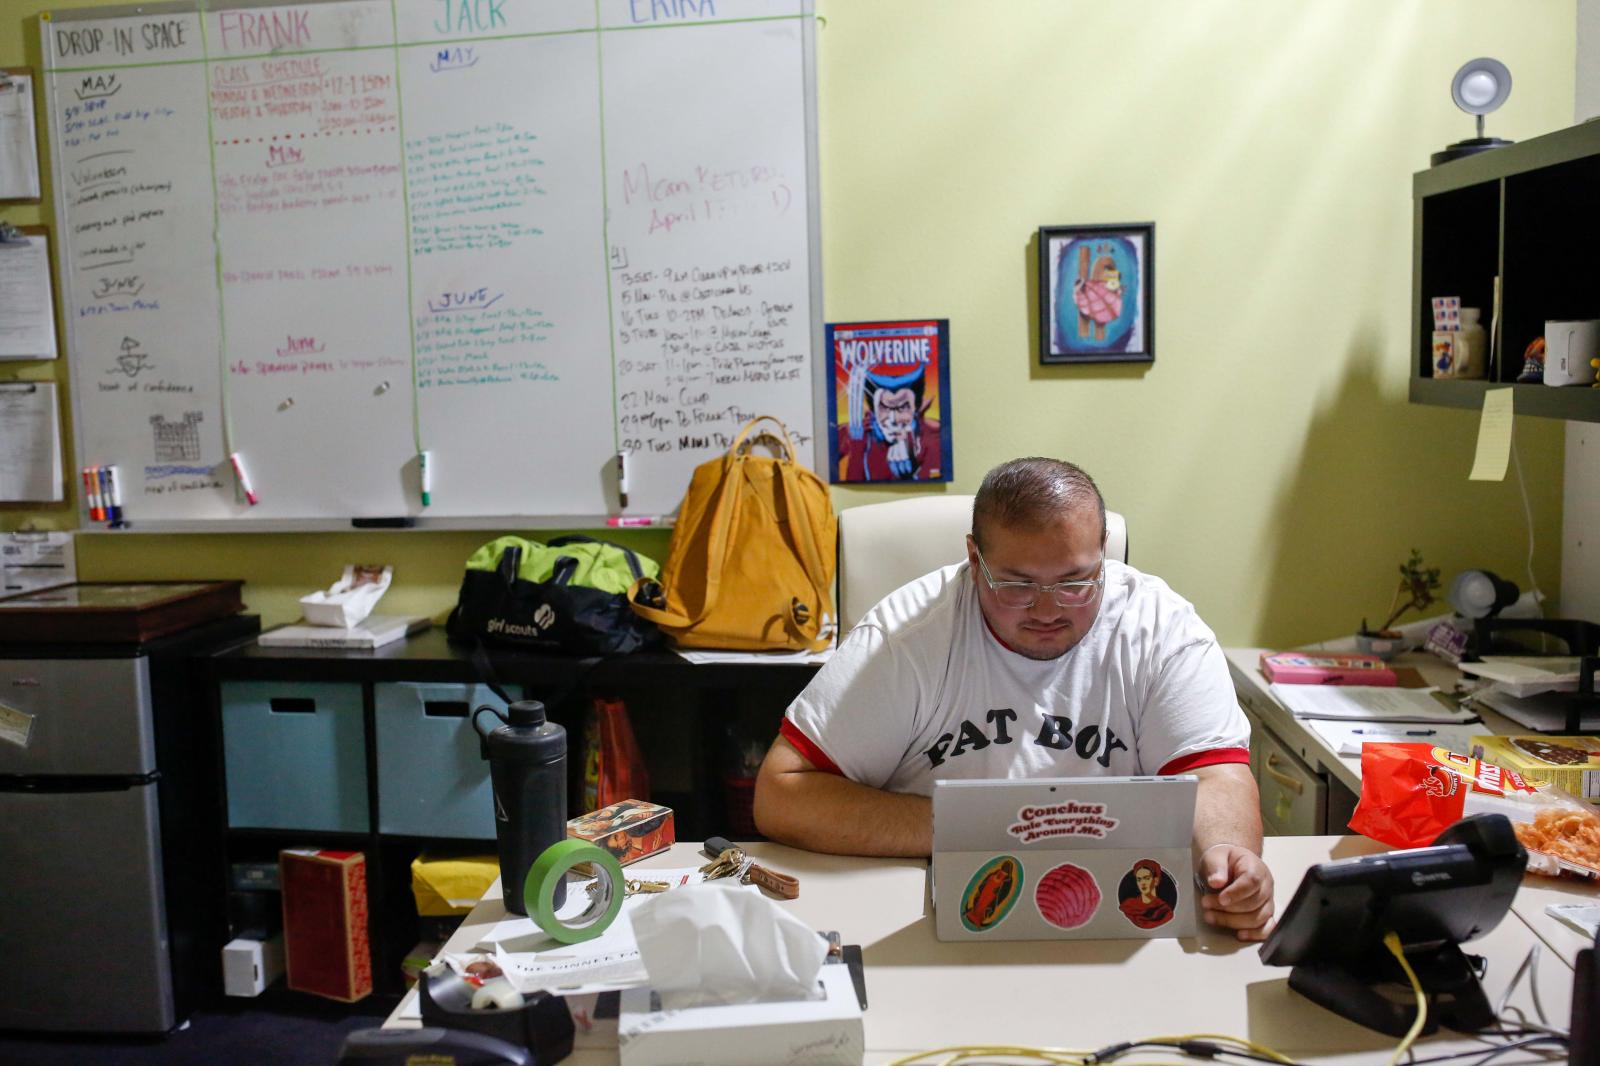 Frank Pe&ntilde;a, 27, responds to work emails at the San Jose LGBTQ Youth Space where he...